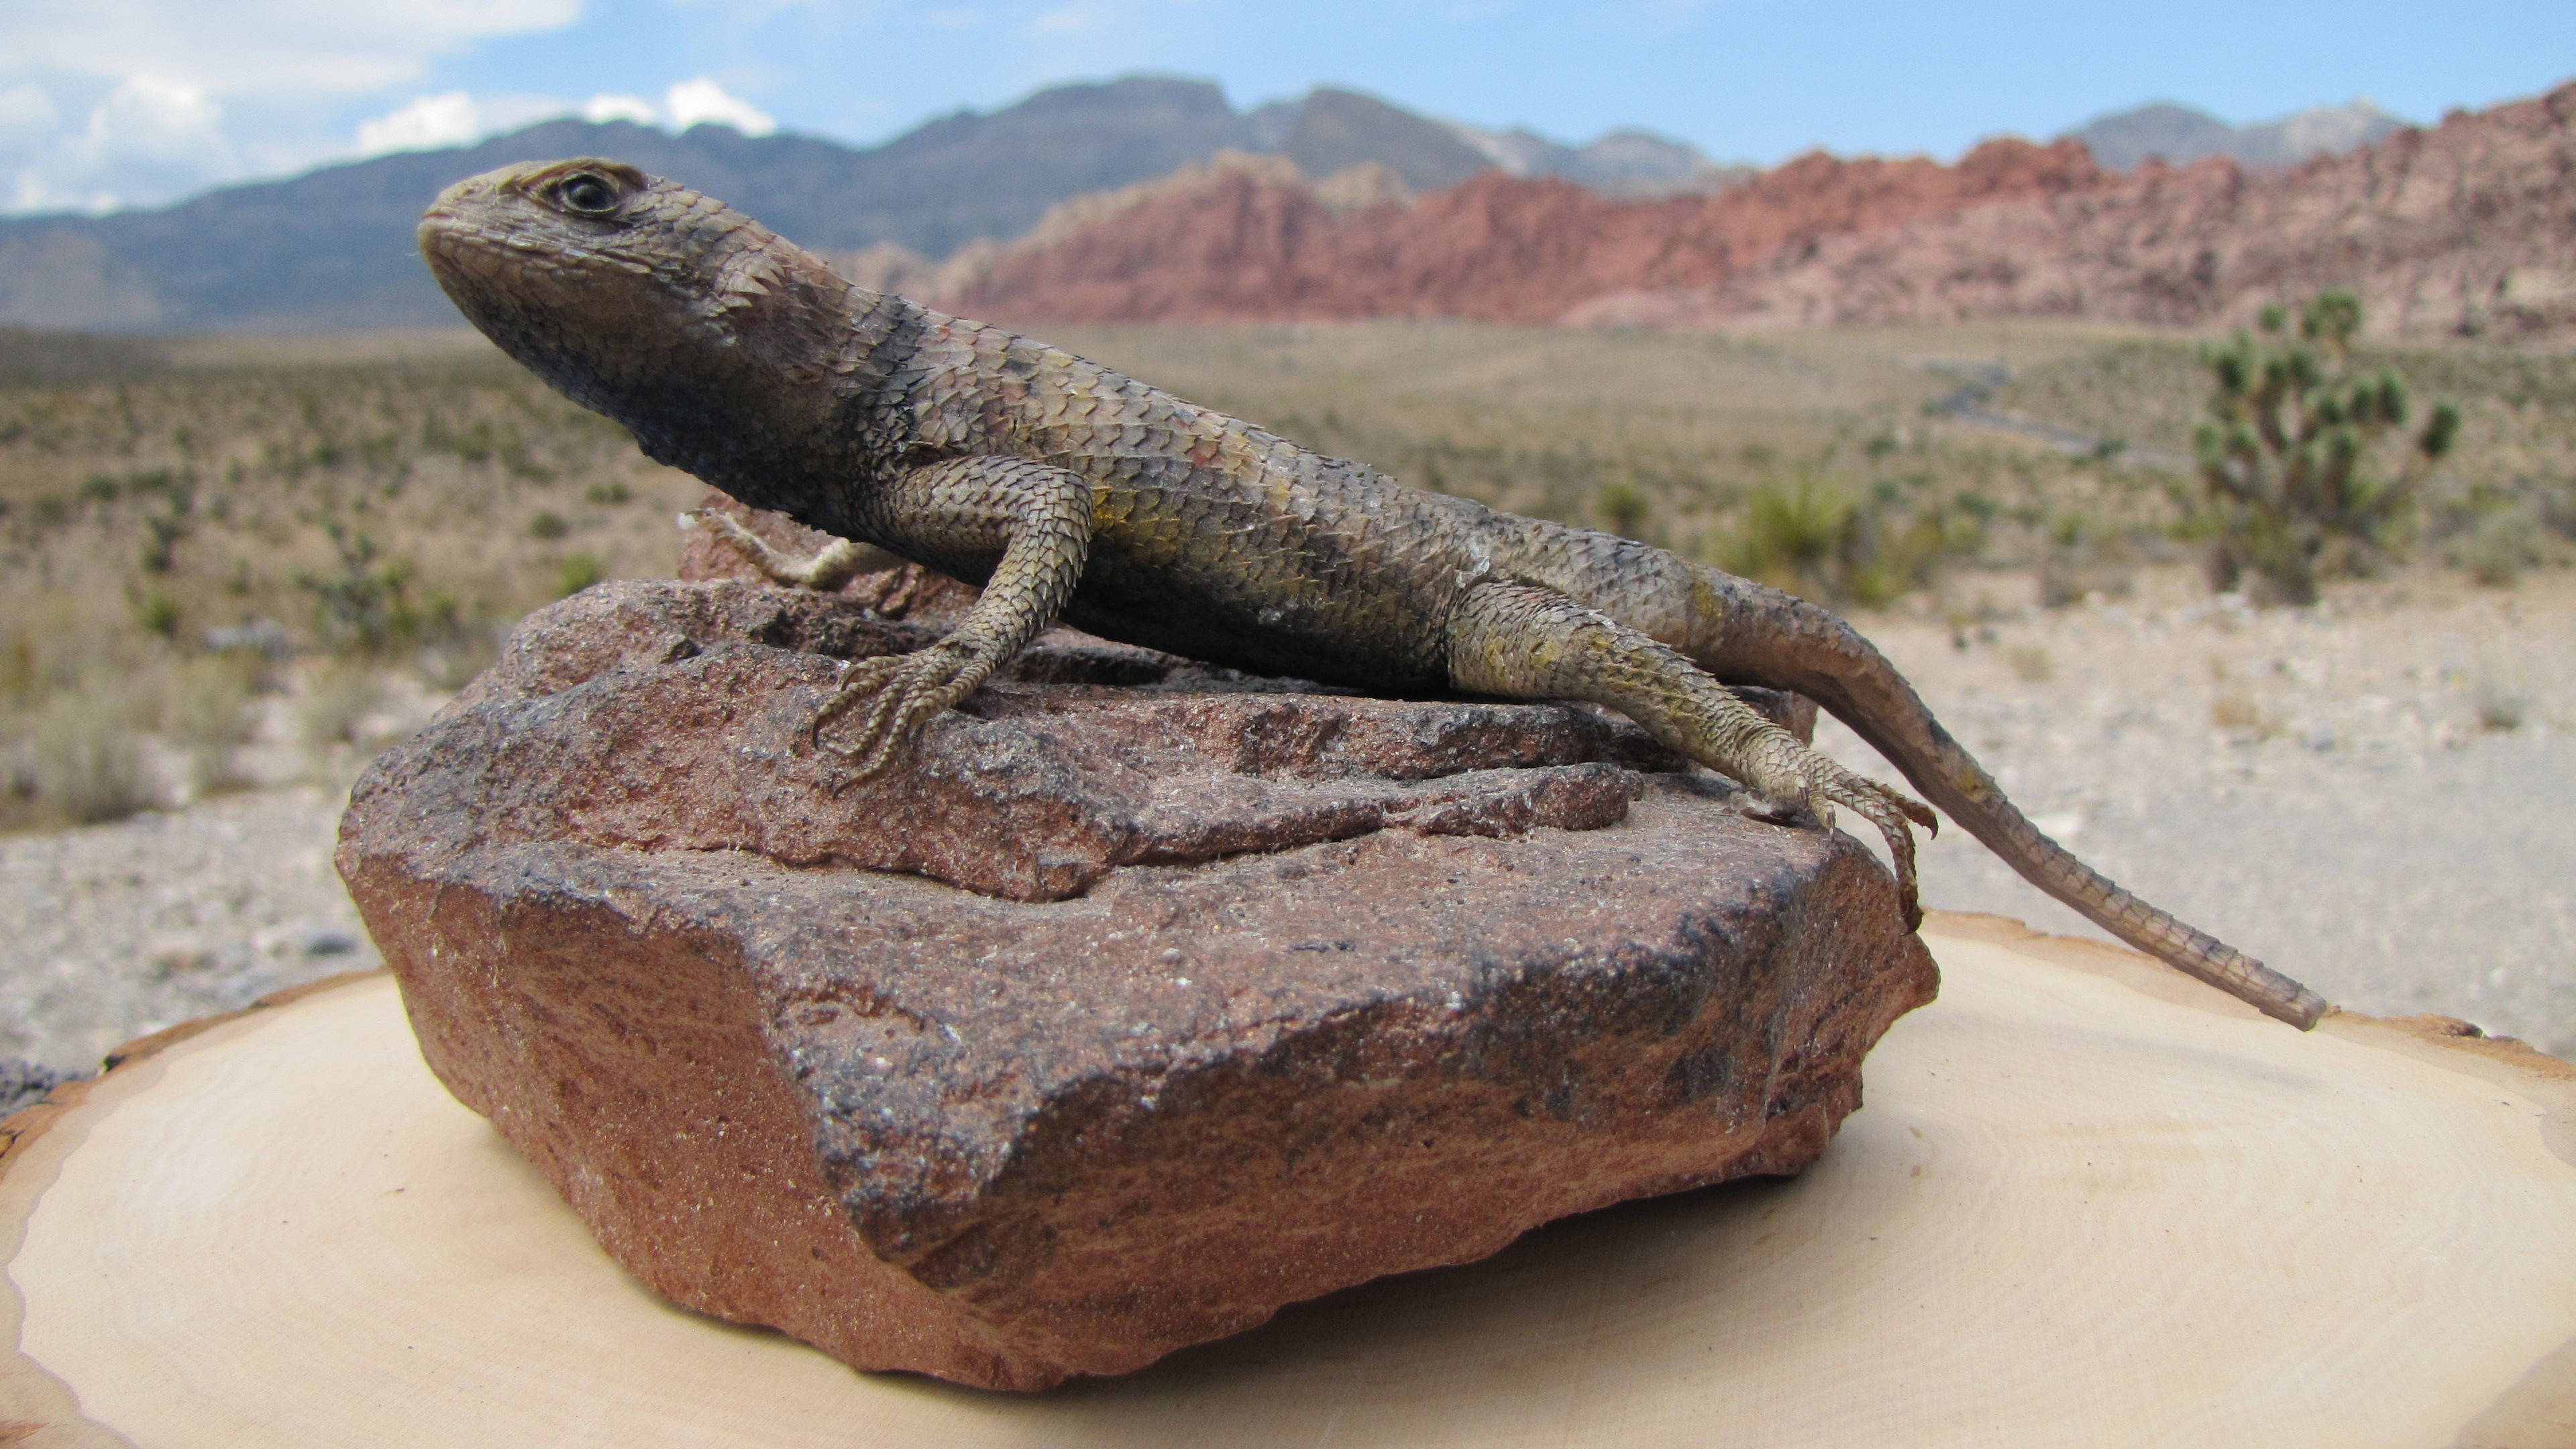 Wildlife Wednesday: Yellow-backed Spiny Lizard | Red Rock Canyon Las ...